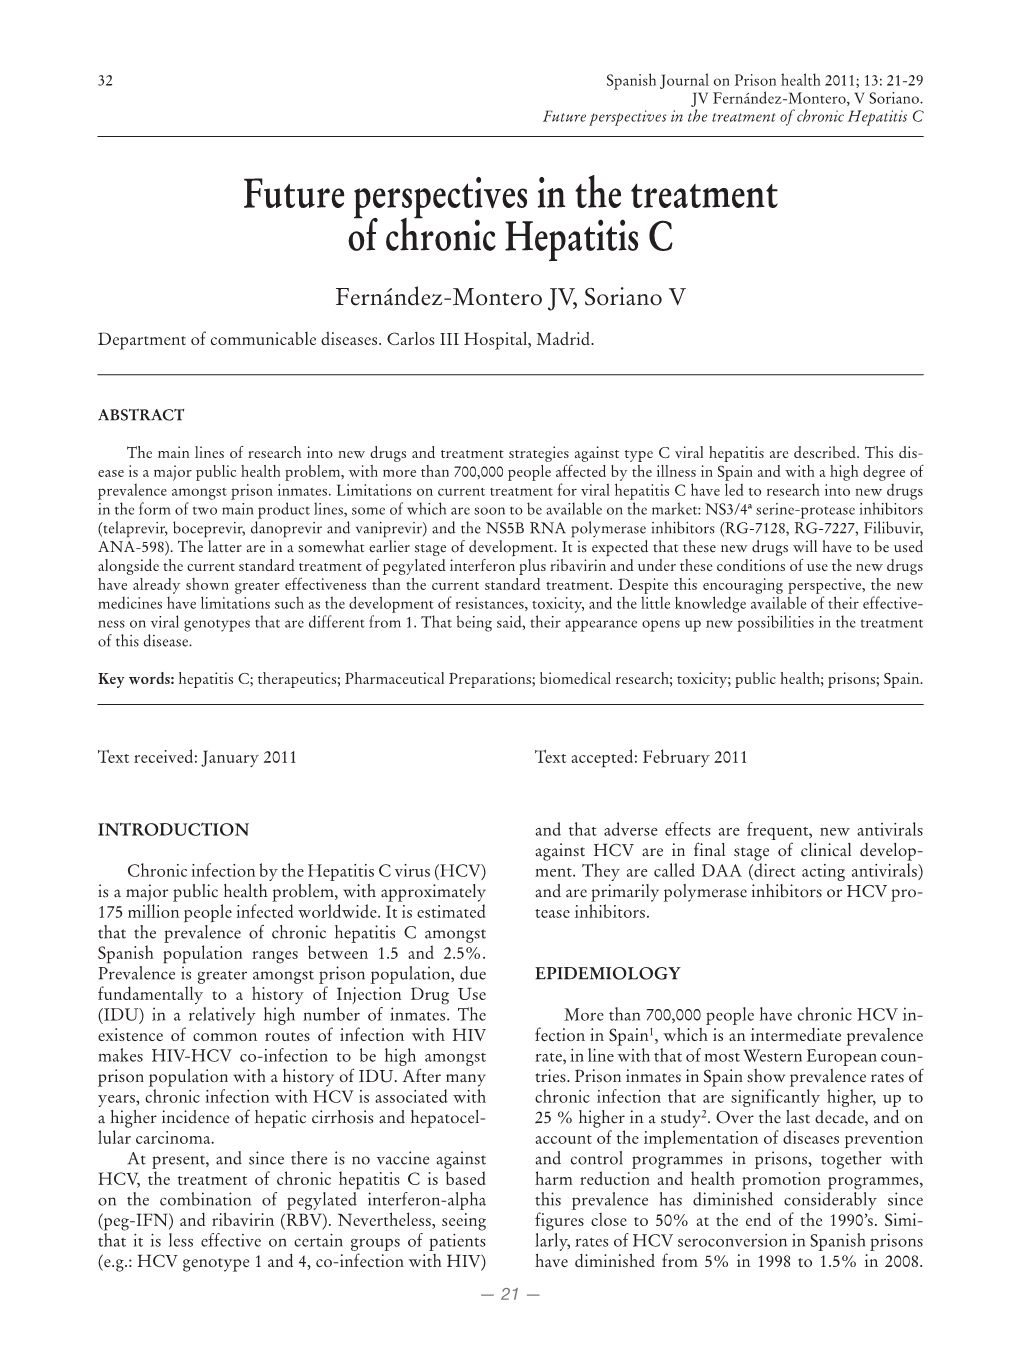 Future Perspectives in the Treatment of Chronic Hepatitis C